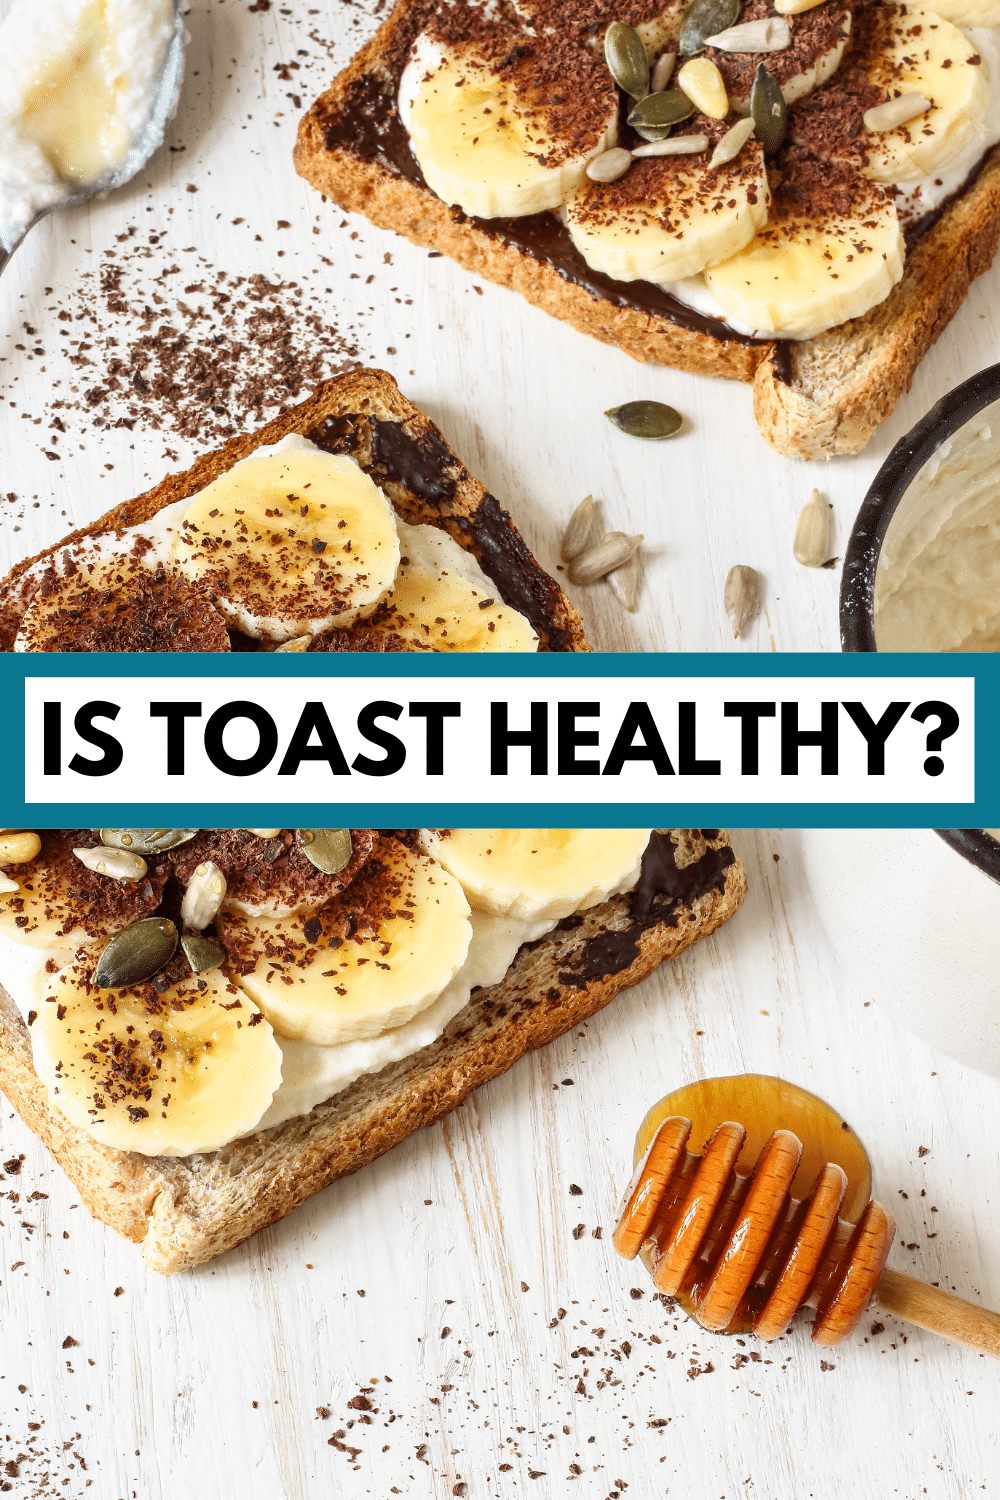 toast topped with banana slices and seeds with text overlay: "is toast healthy?"